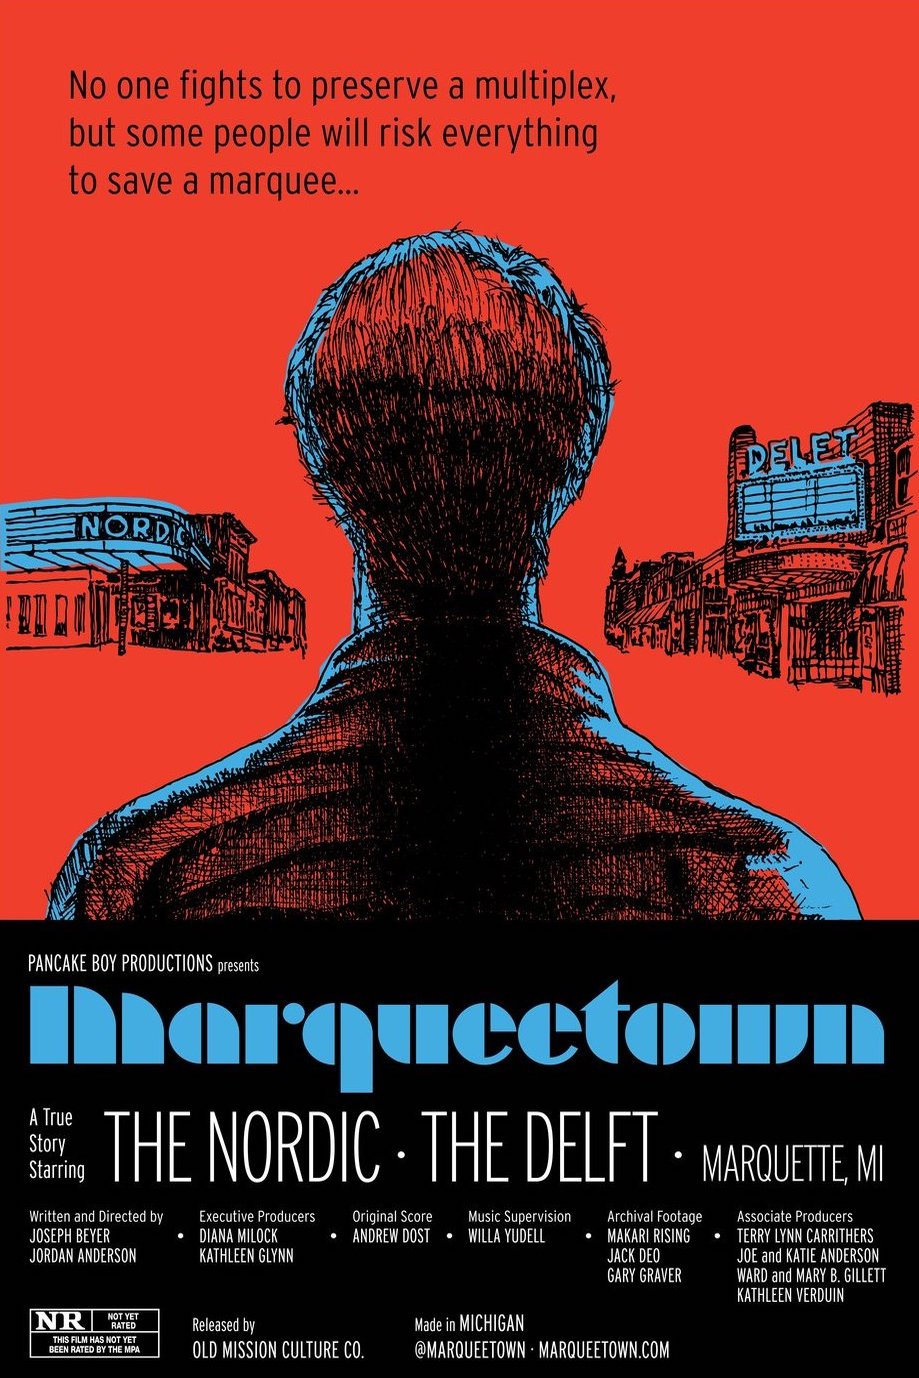 Poster of the movie Marqueetown